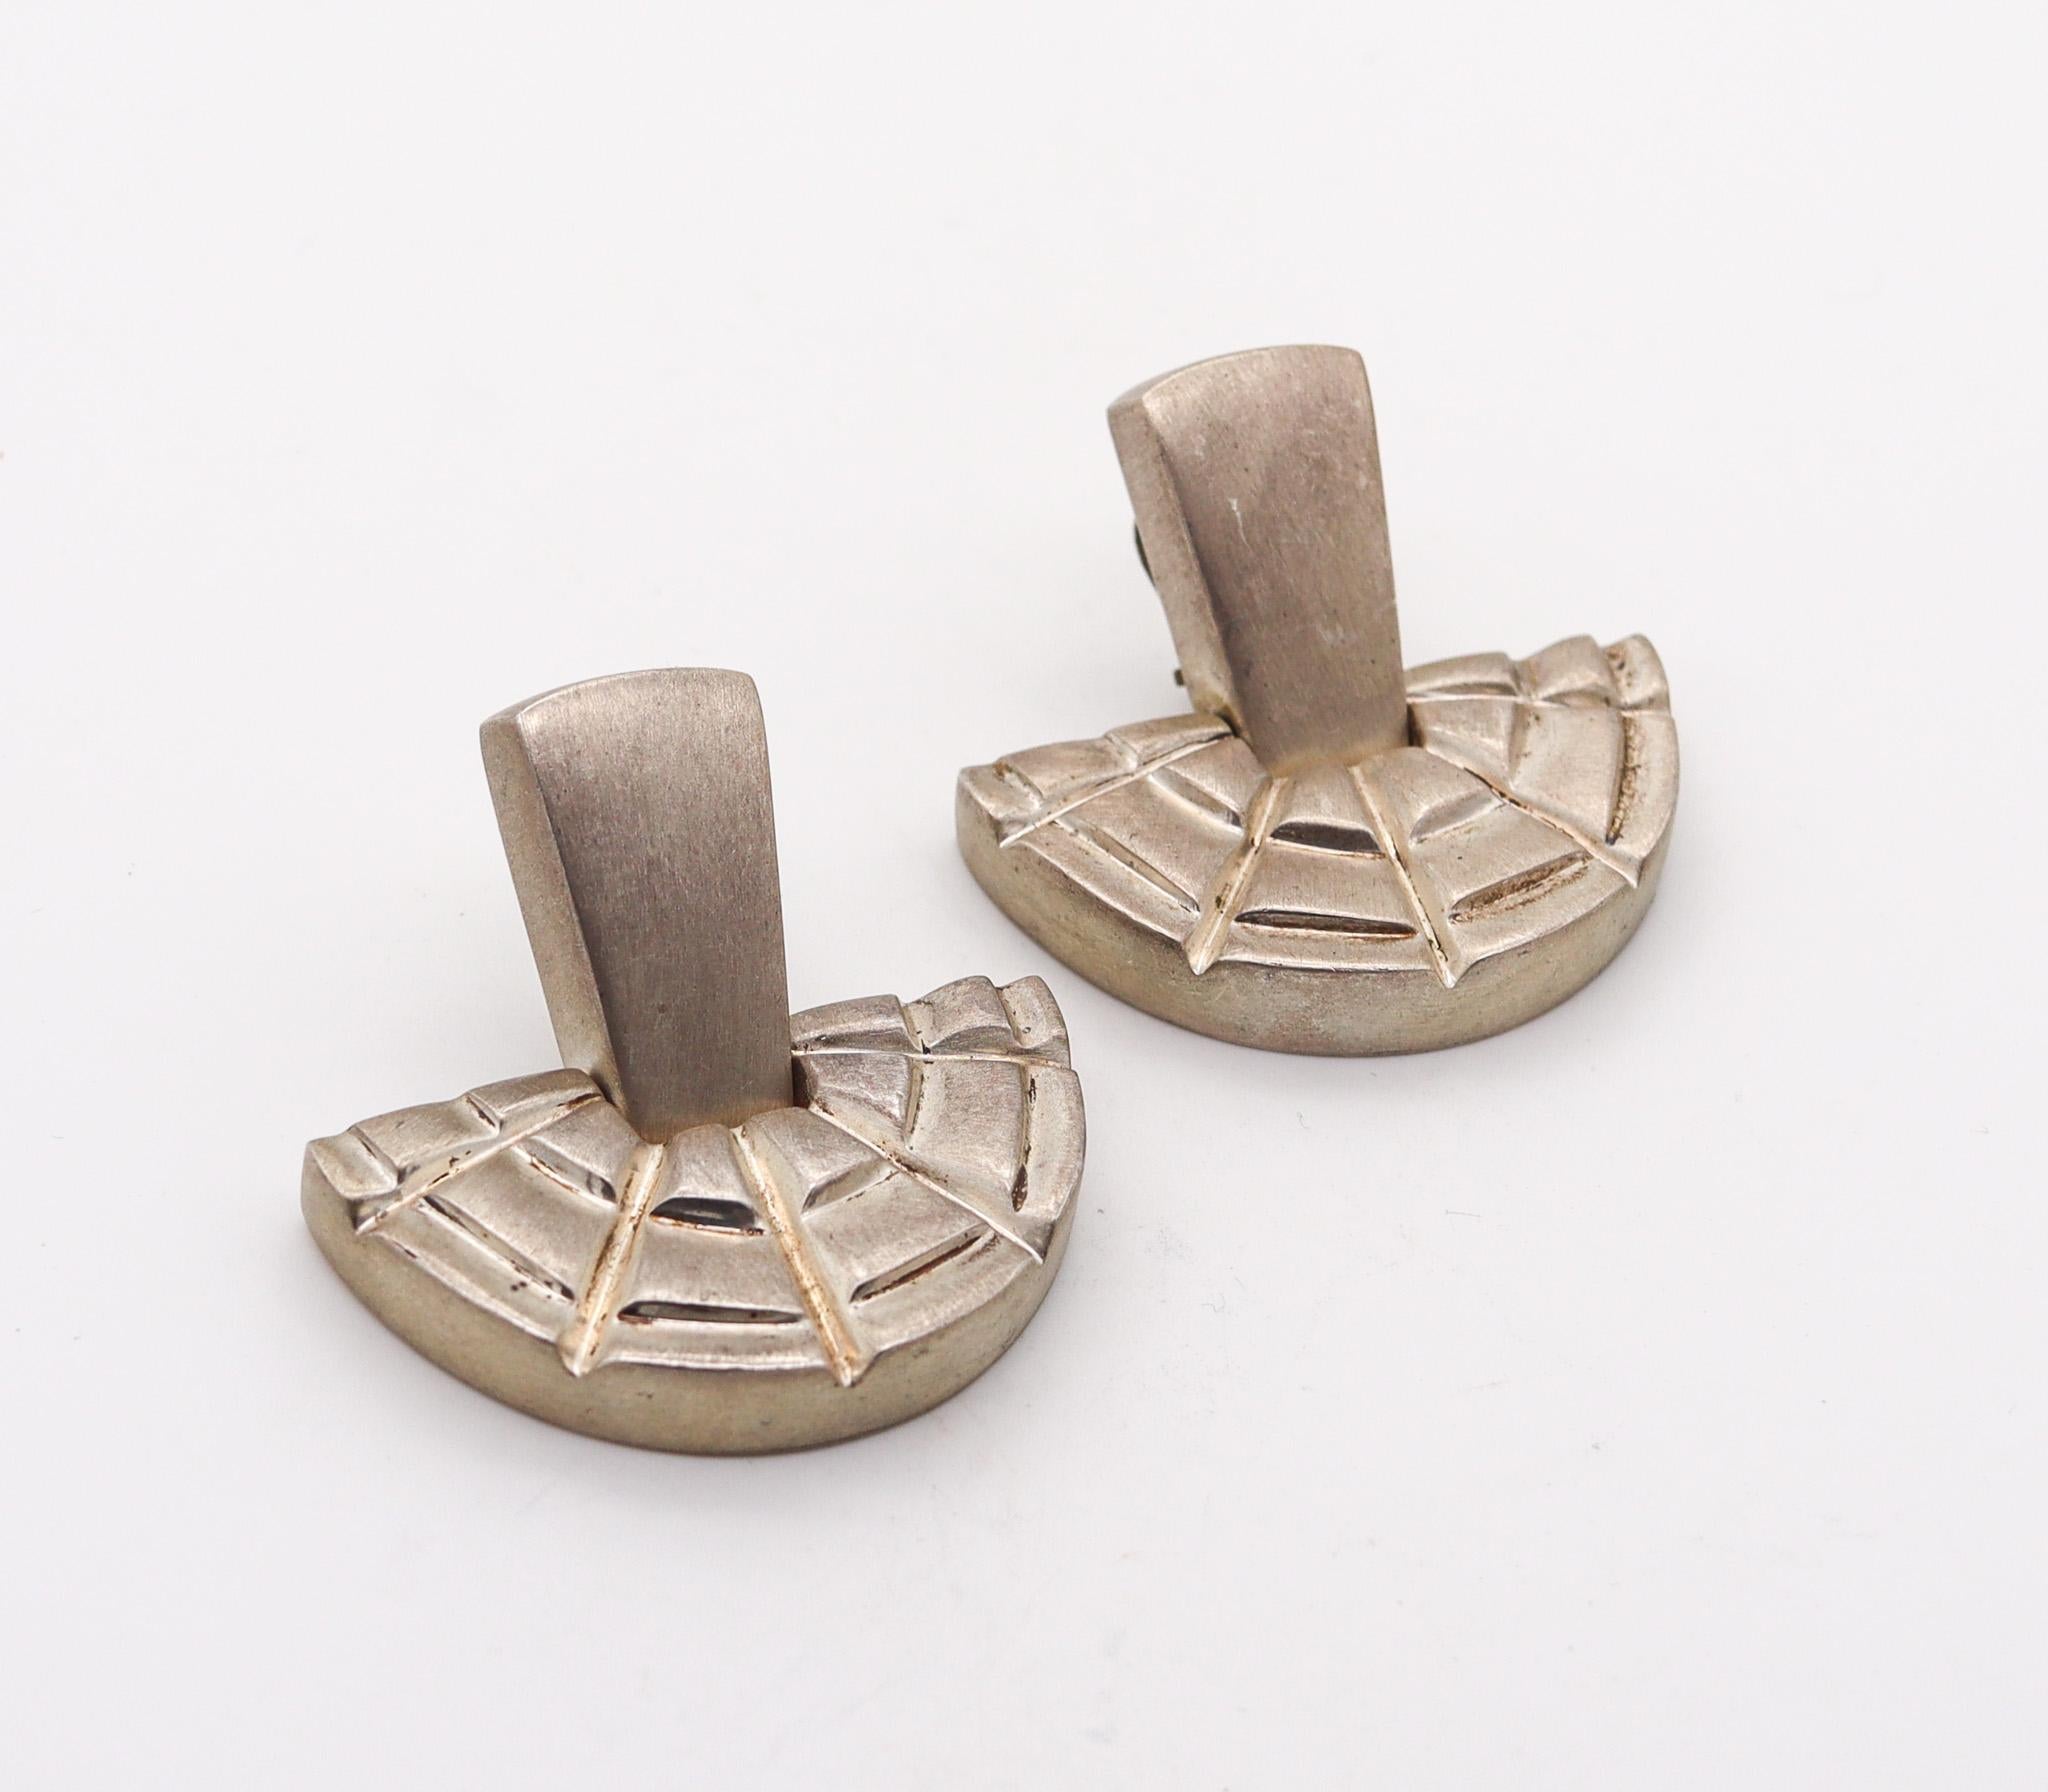 Sculpted dangle earrings designed by Patricia Von Musulin.

Beautiful pair of dangle clips-on earrings, created by Patricia Von Musulin during the modernist period, back in the late 1970. The earrings were carefully crafted with sculpted geometric